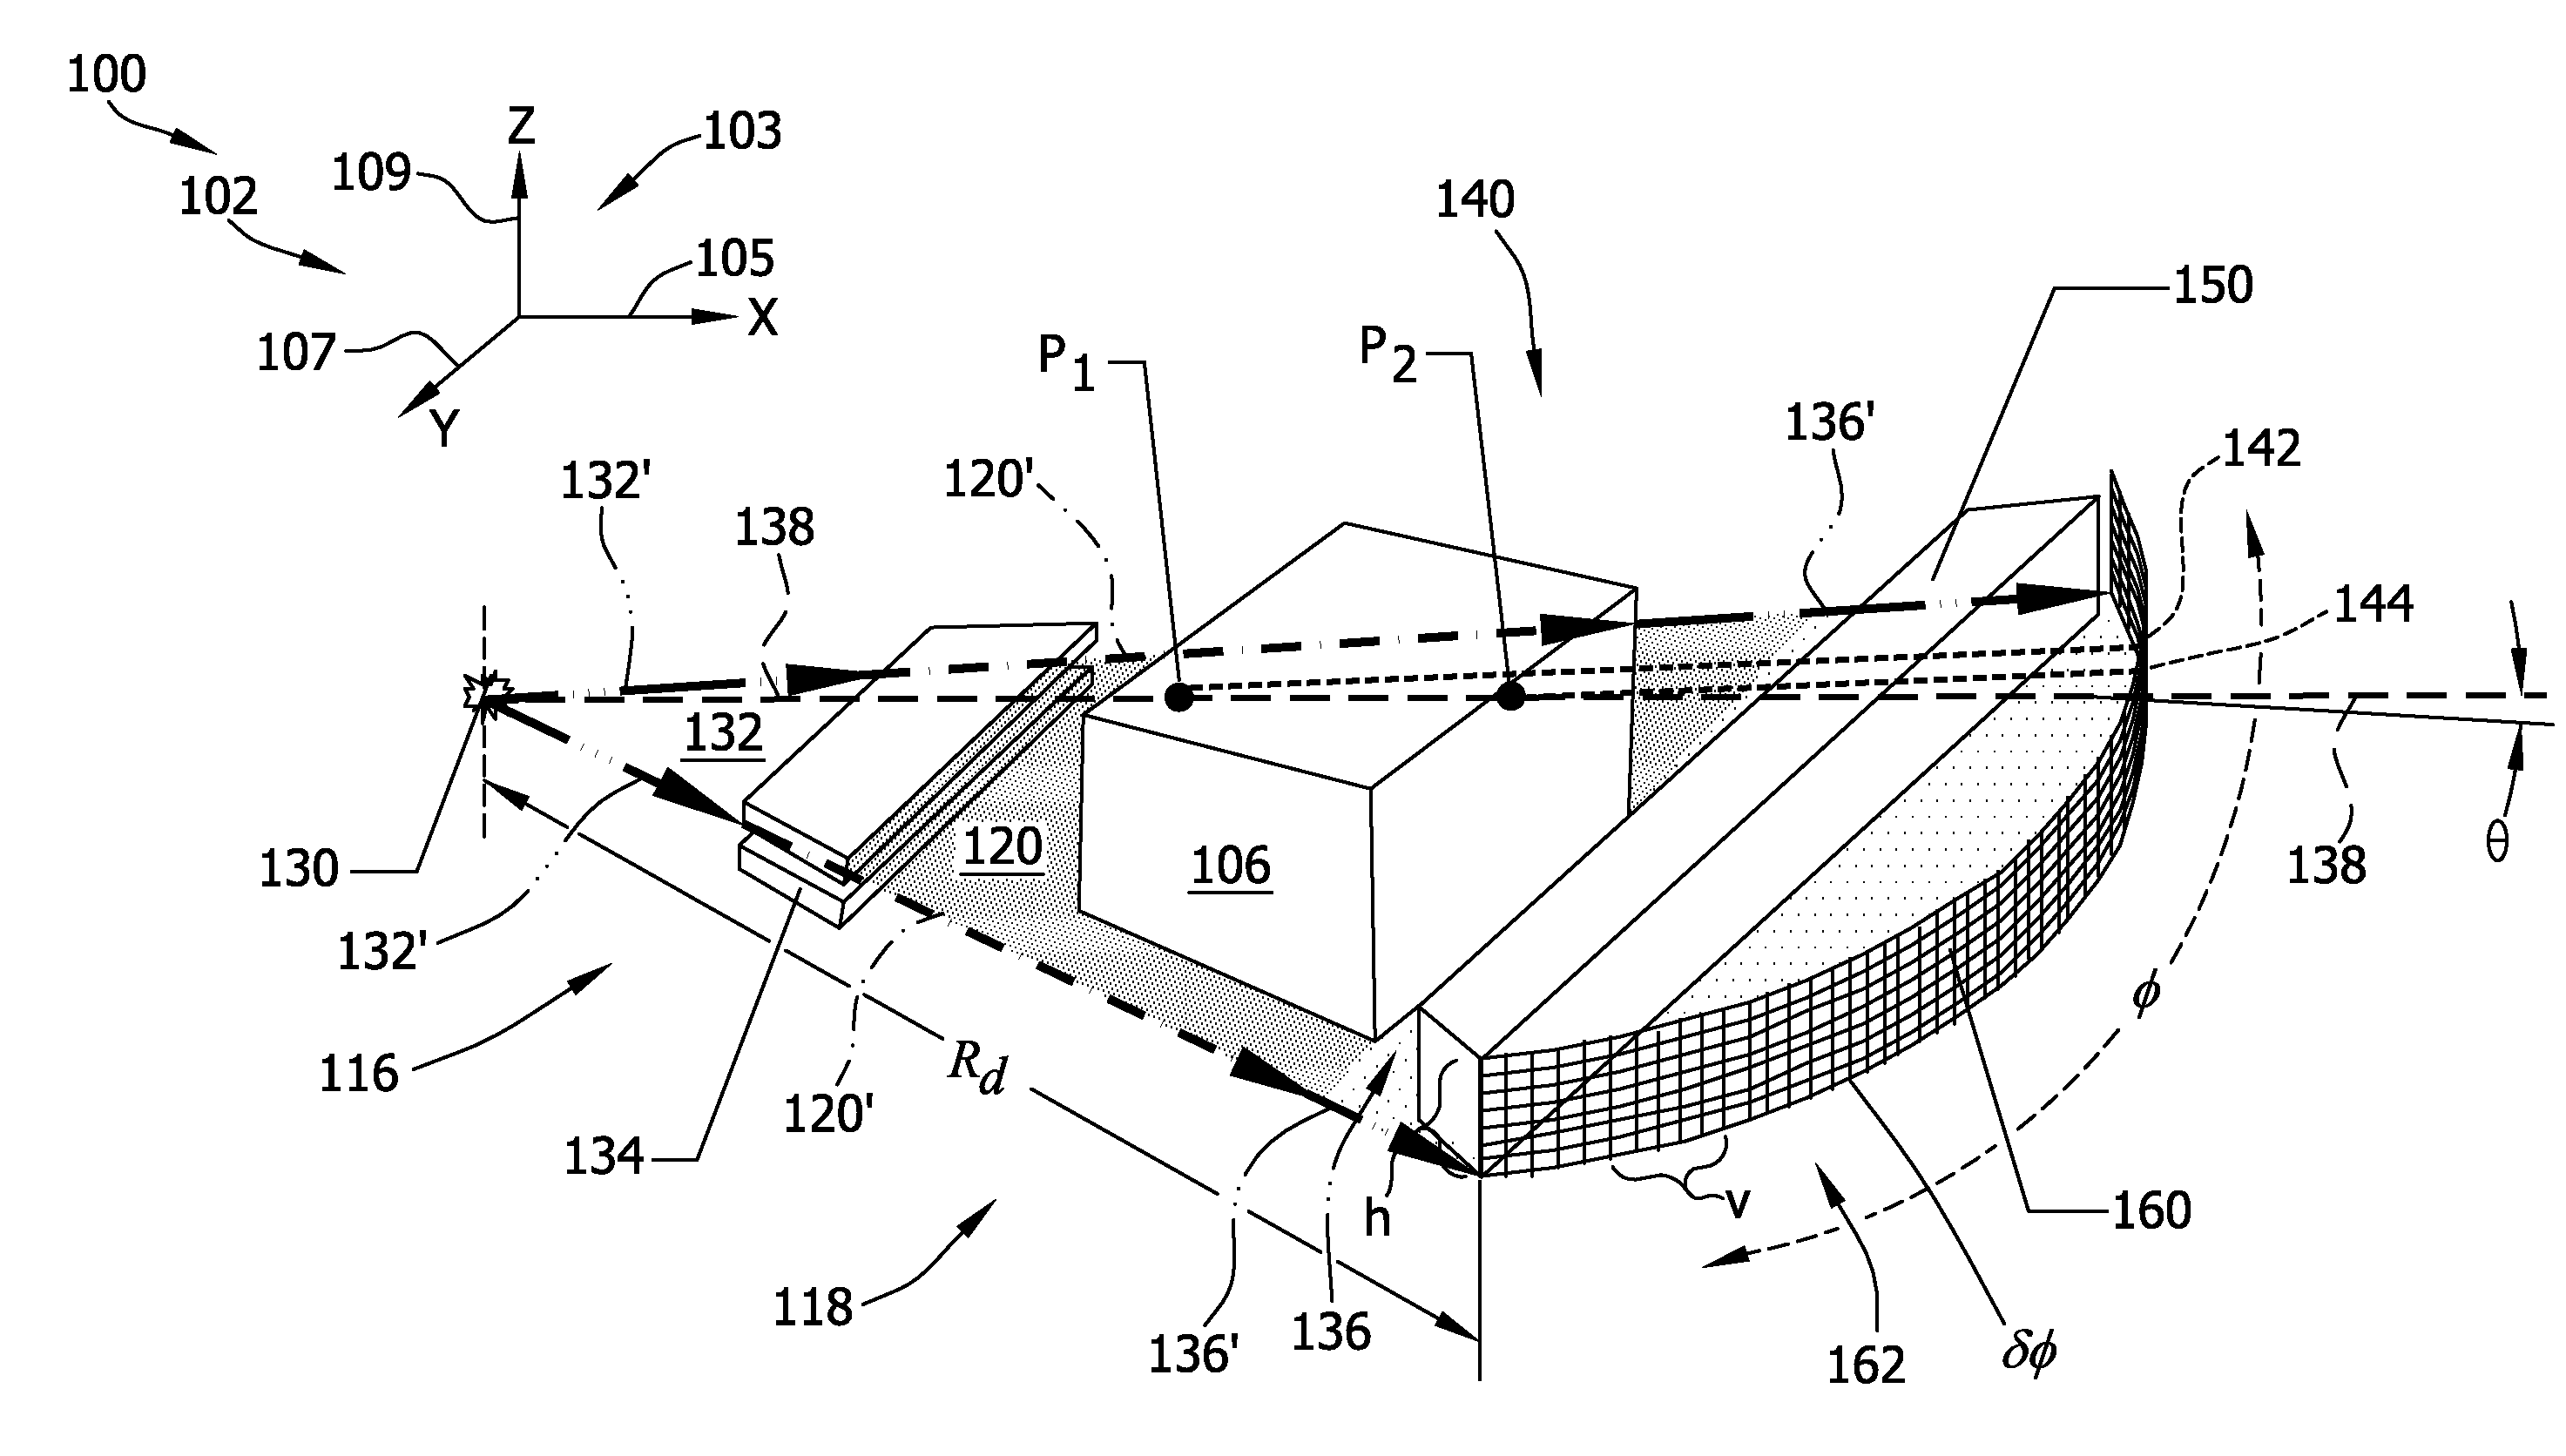 X-ray diffraction device, object imaging system, and method for operating a security system